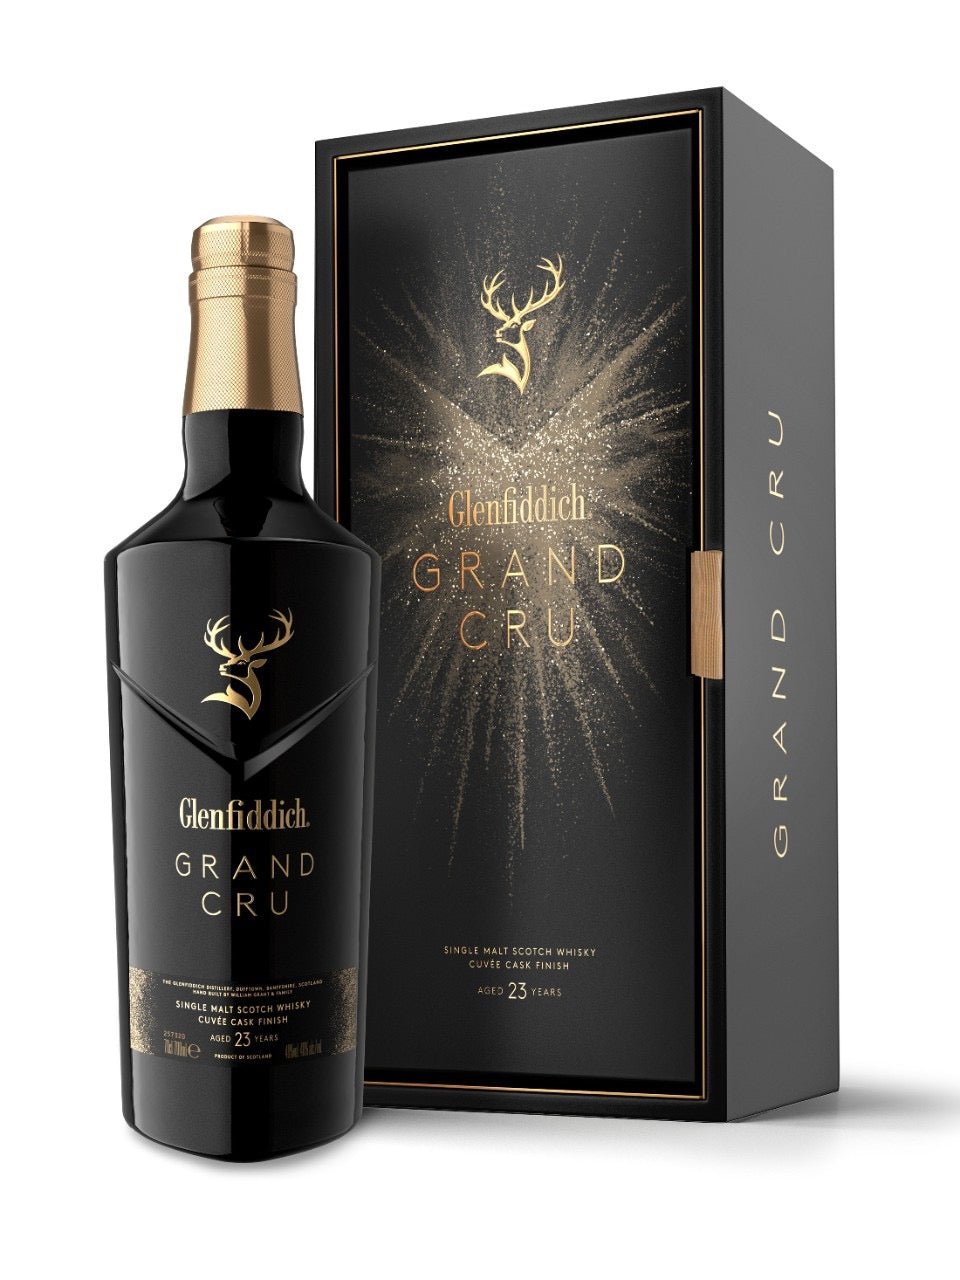 Glenfiddich 23 Year Old Grand Cru Single Malt Scotch Whisky | Exquisite Wine & Alcohol Gift Delivery Toronto Canada | Vyno